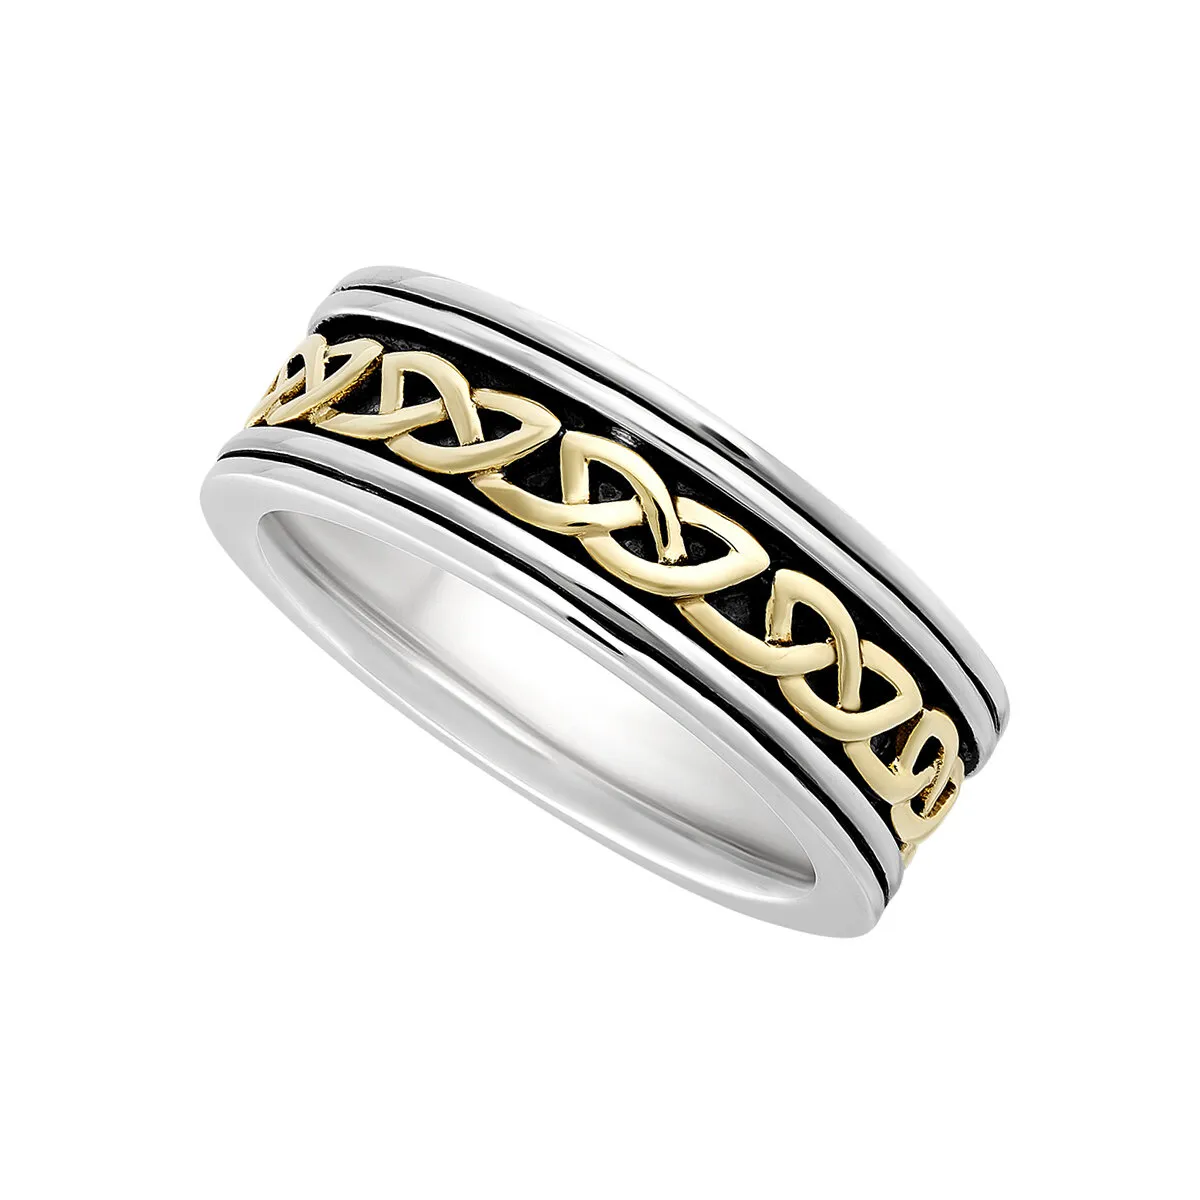 Buy Chunky Open Celtic Knot Ring Sterling Silver Online in India - Etsy